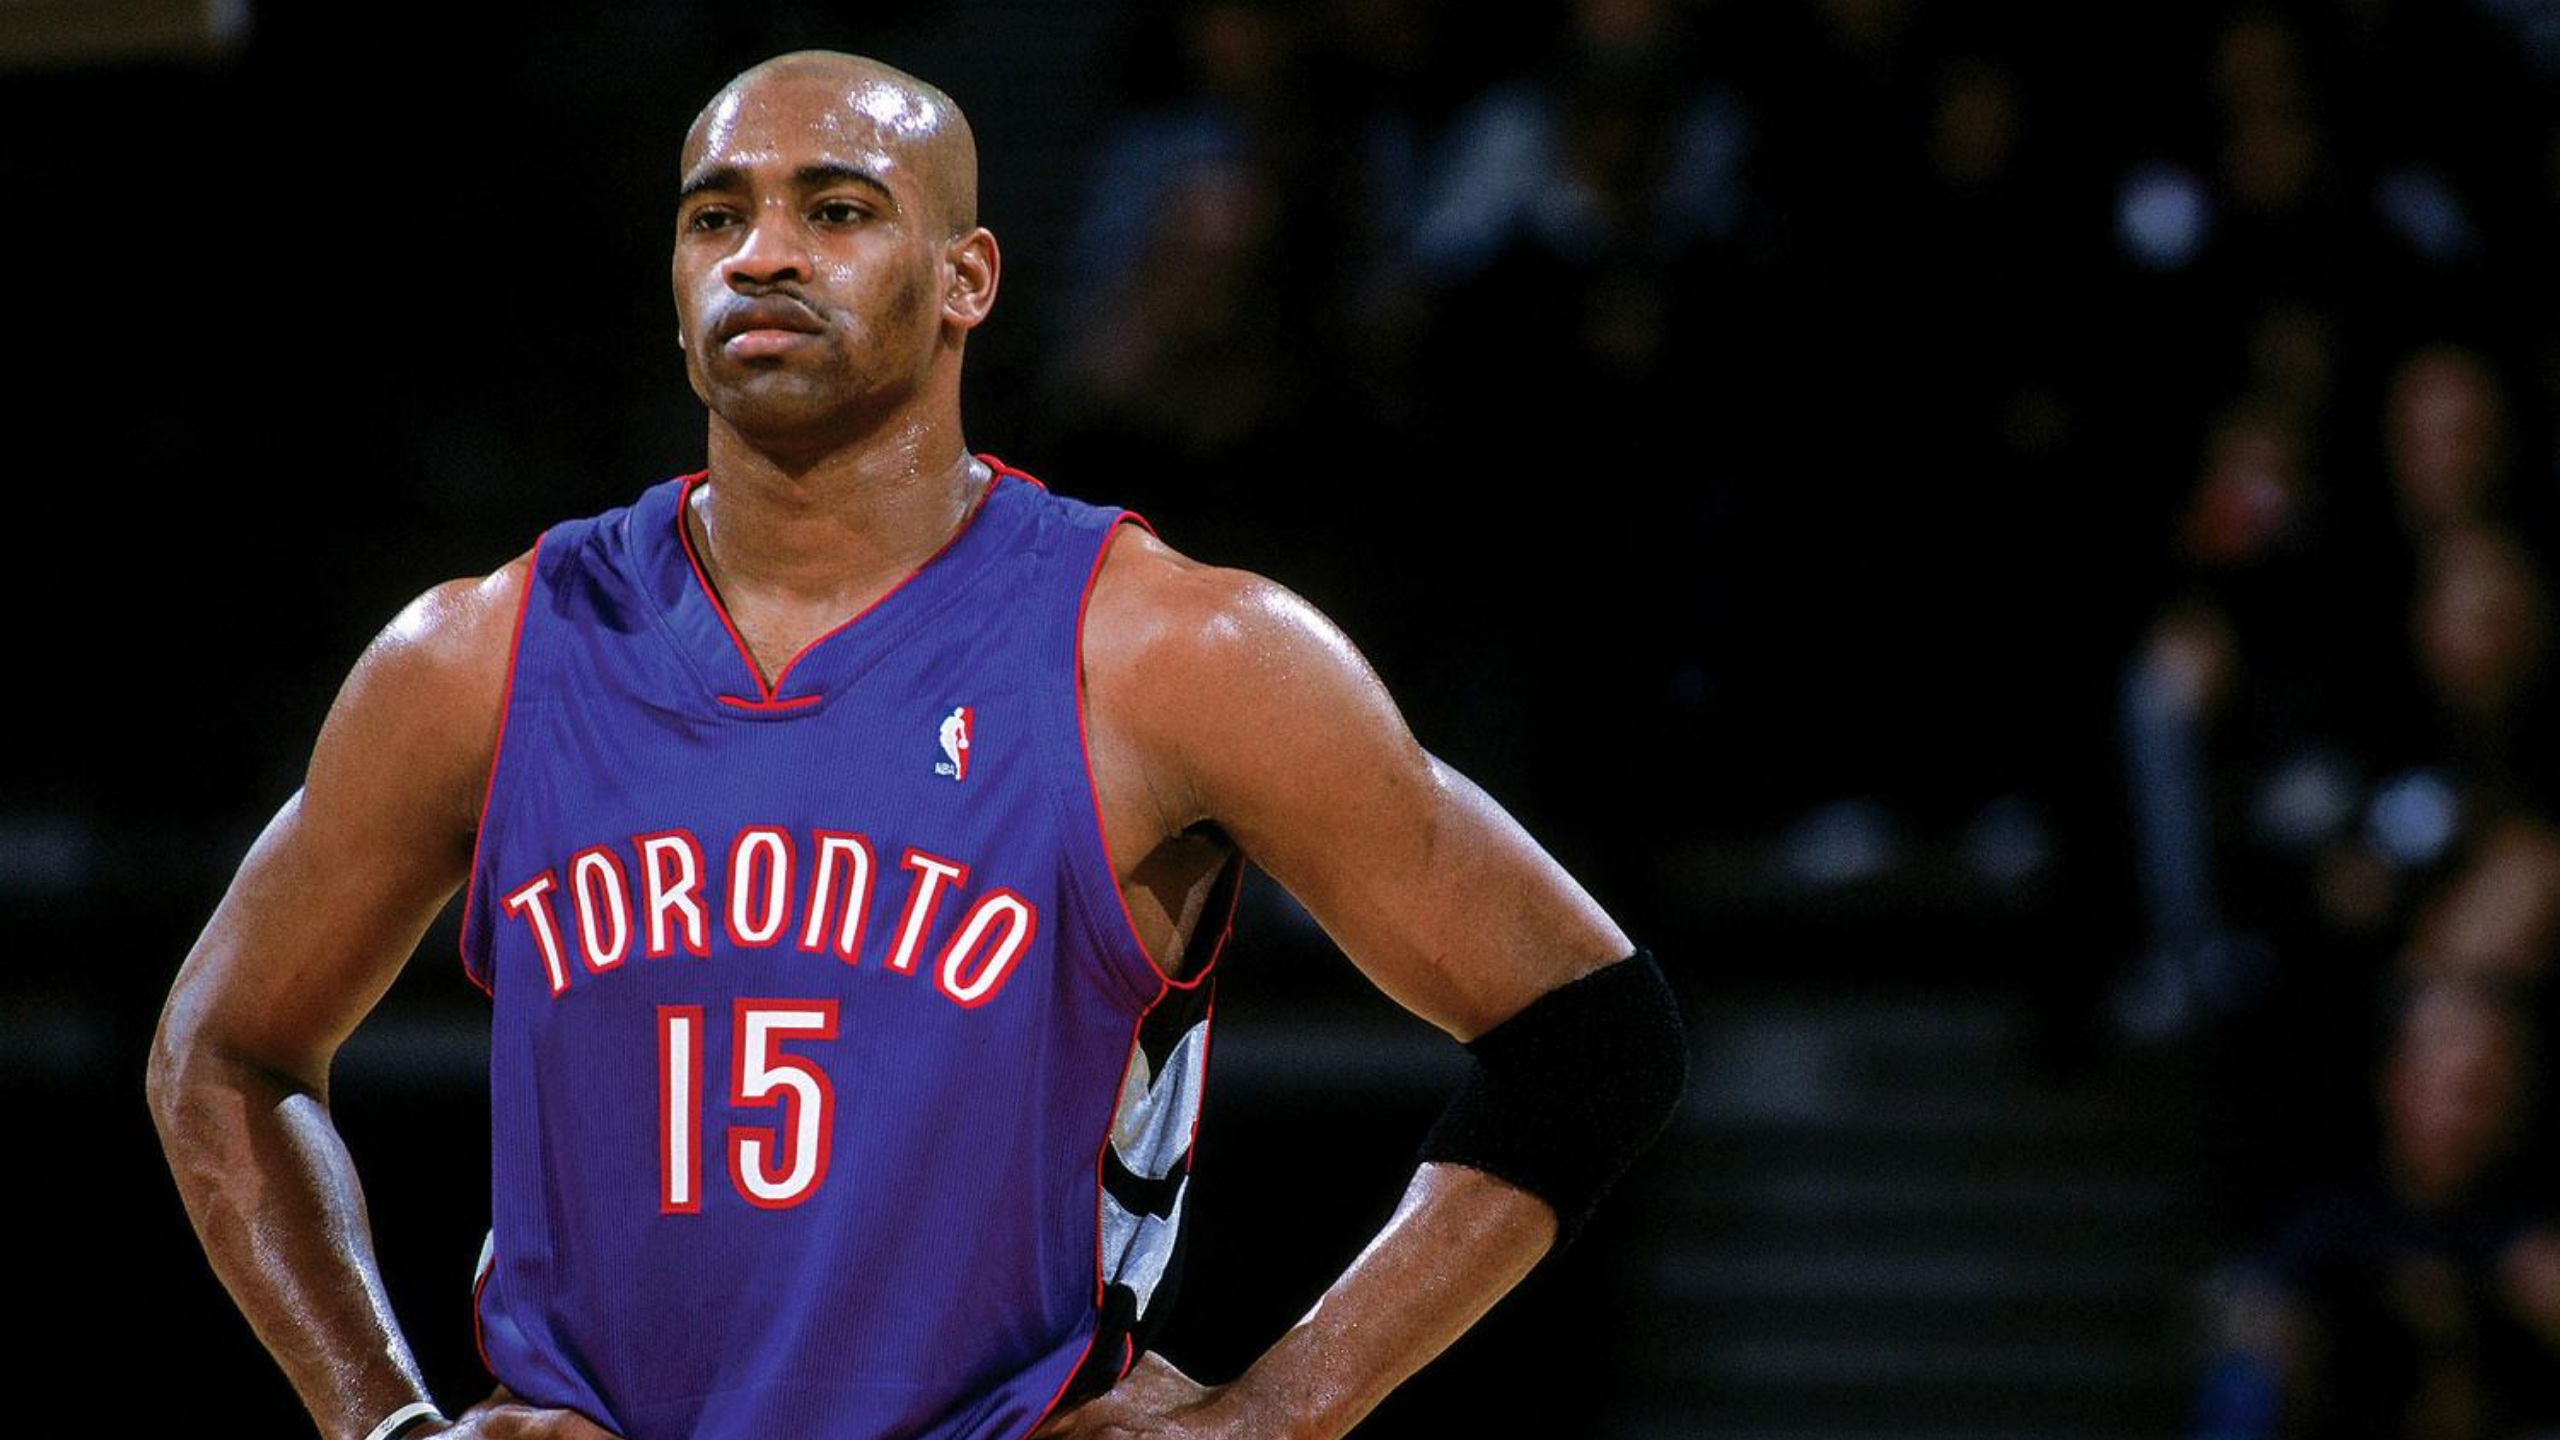 Retro Vince Carter Jerseys Available at The NBA Store